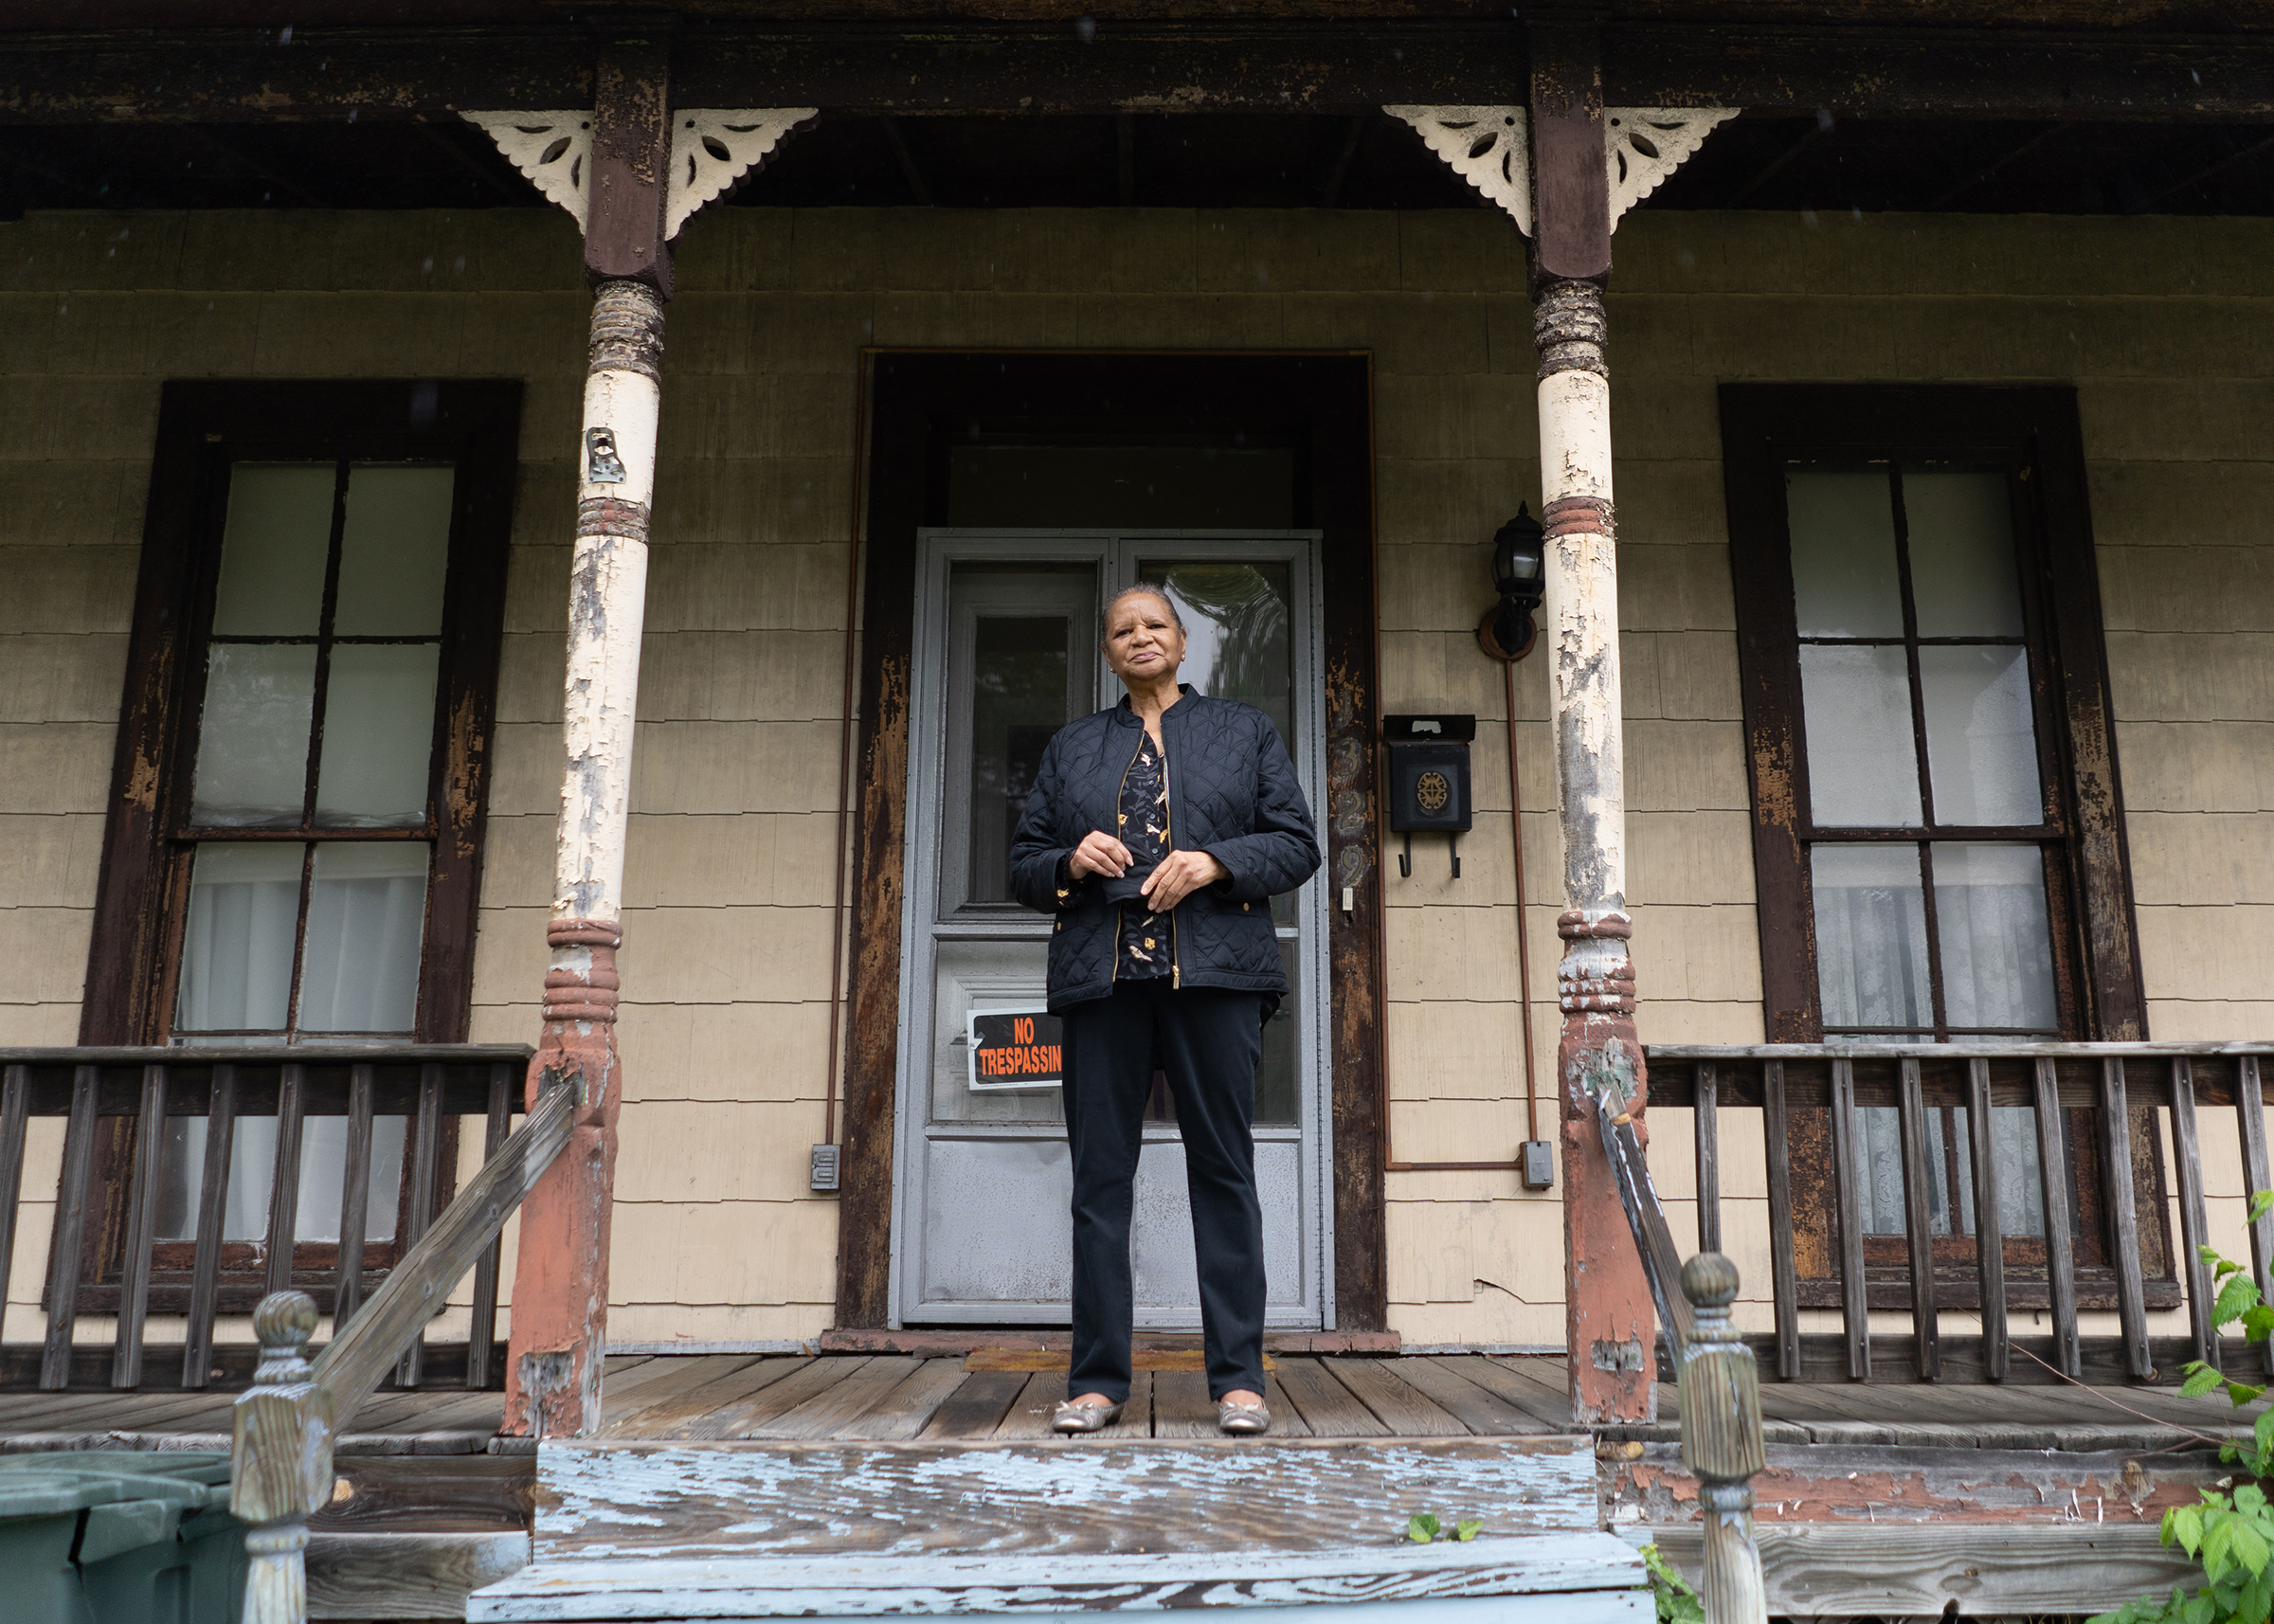 Brightwood resident, Carol Lightfoot, 73, stands on her front porch in Northwest Washington, DC.